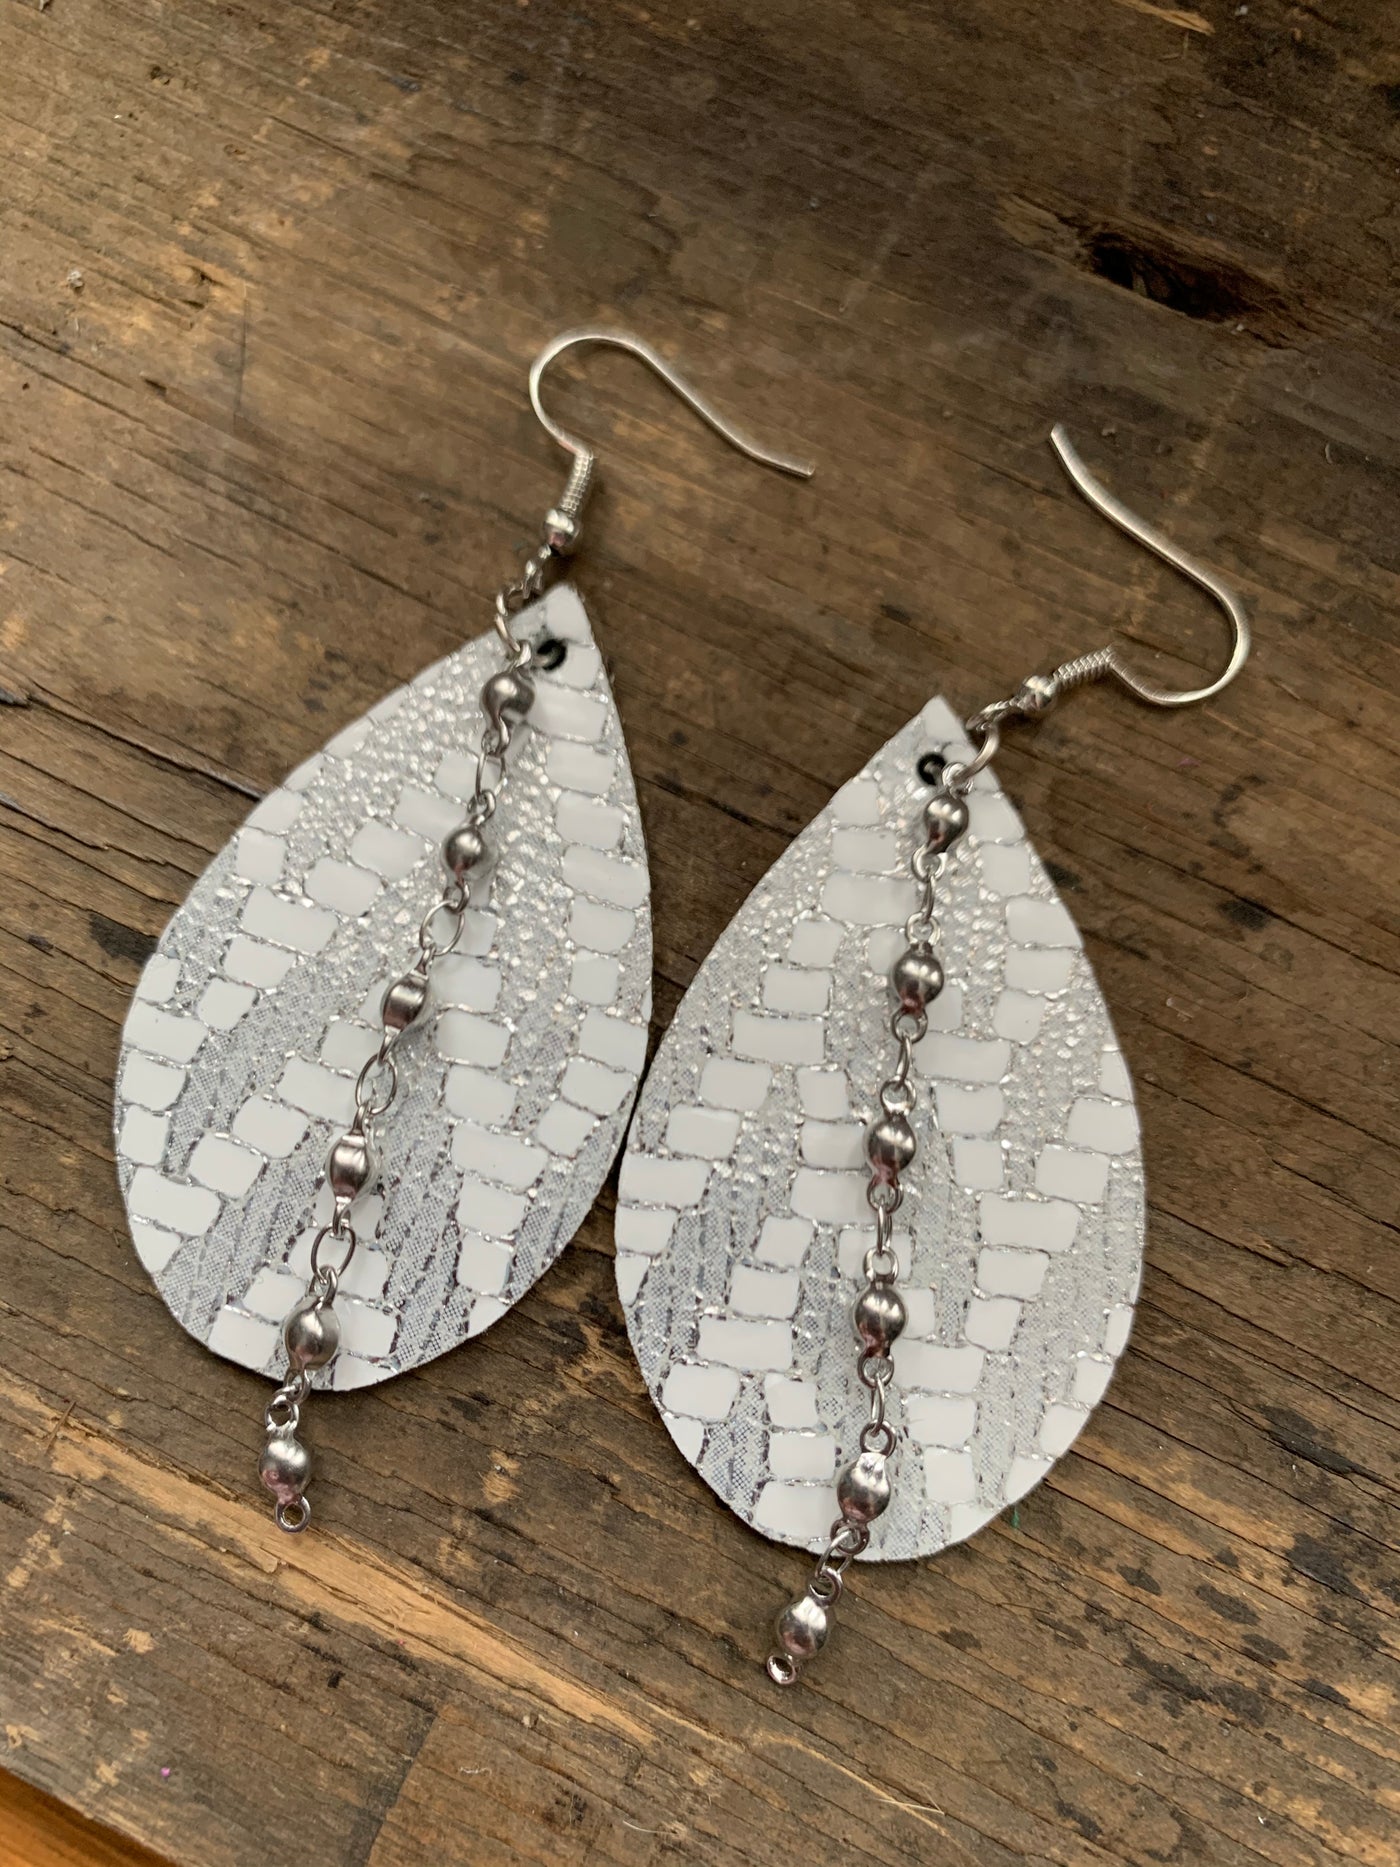 Silver and White Chevron Leather Earrings with Silver Ball Chain - Jill's Jewels | Unique, Handcrafted, Trendy, And Fun Jewelry